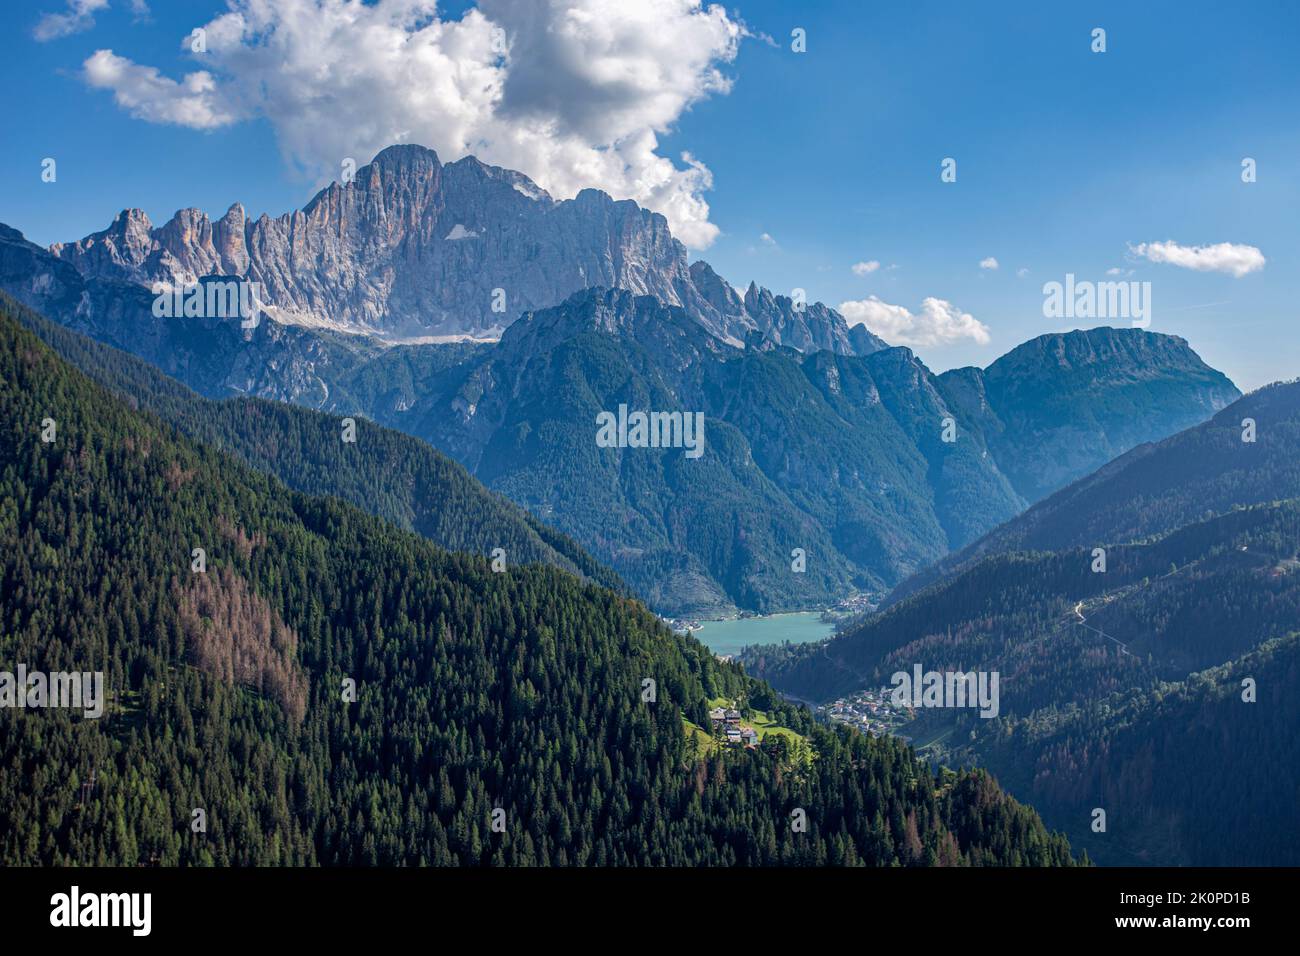 Top view of Civetta Mount and Alleghe lake in the dolomitic scenery, Belluno province, Italy Stock Photo